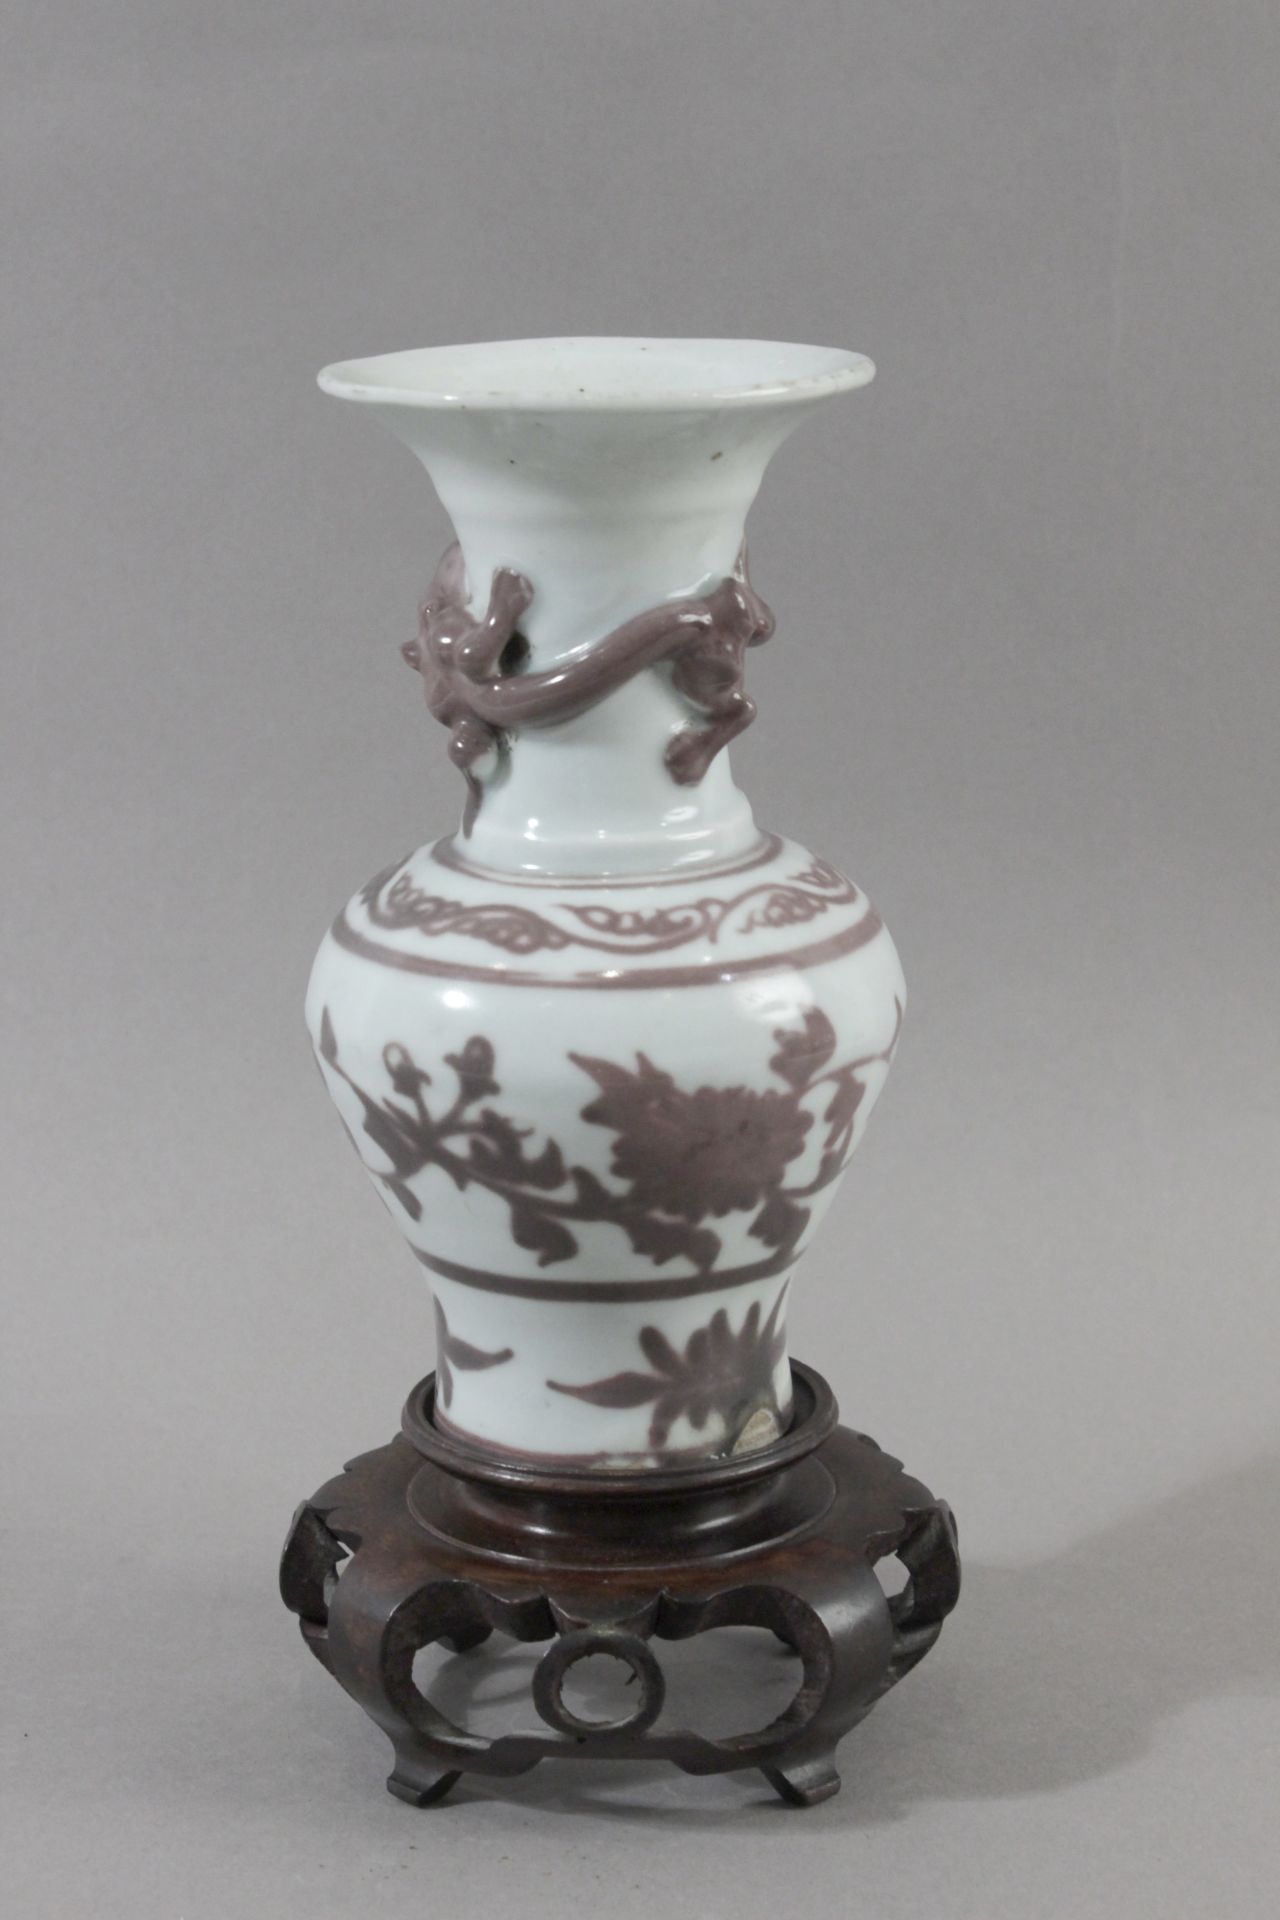 A 20th century Chinese vase from Republic period in celadon porcelain - Image 2 of 7